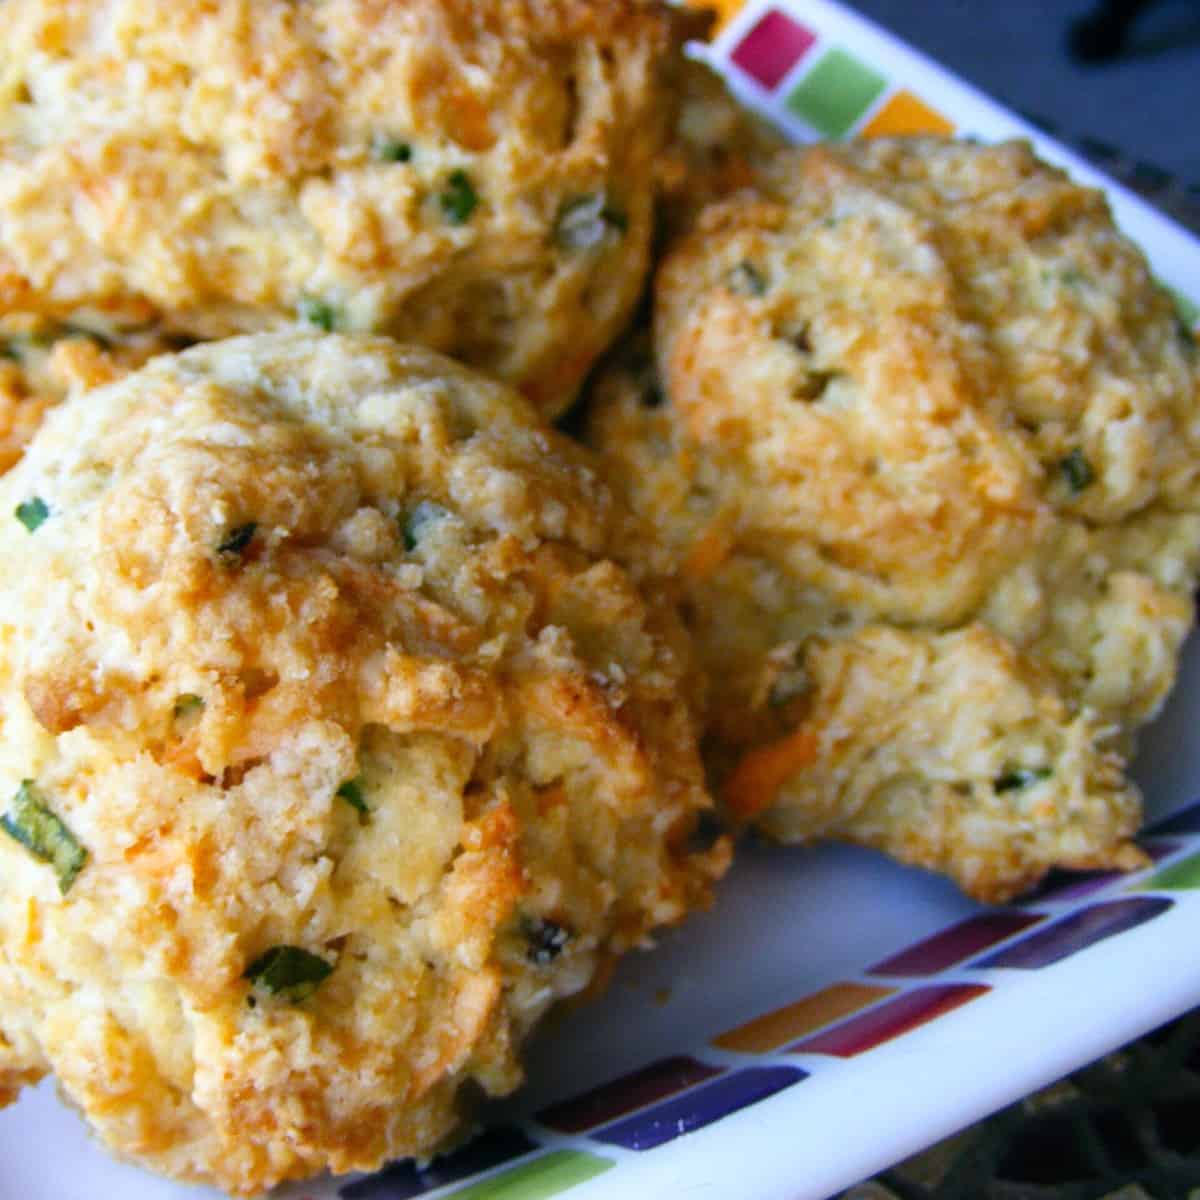  These vegan scallion and cheddar drop biscuits are the ultimate comfort food!